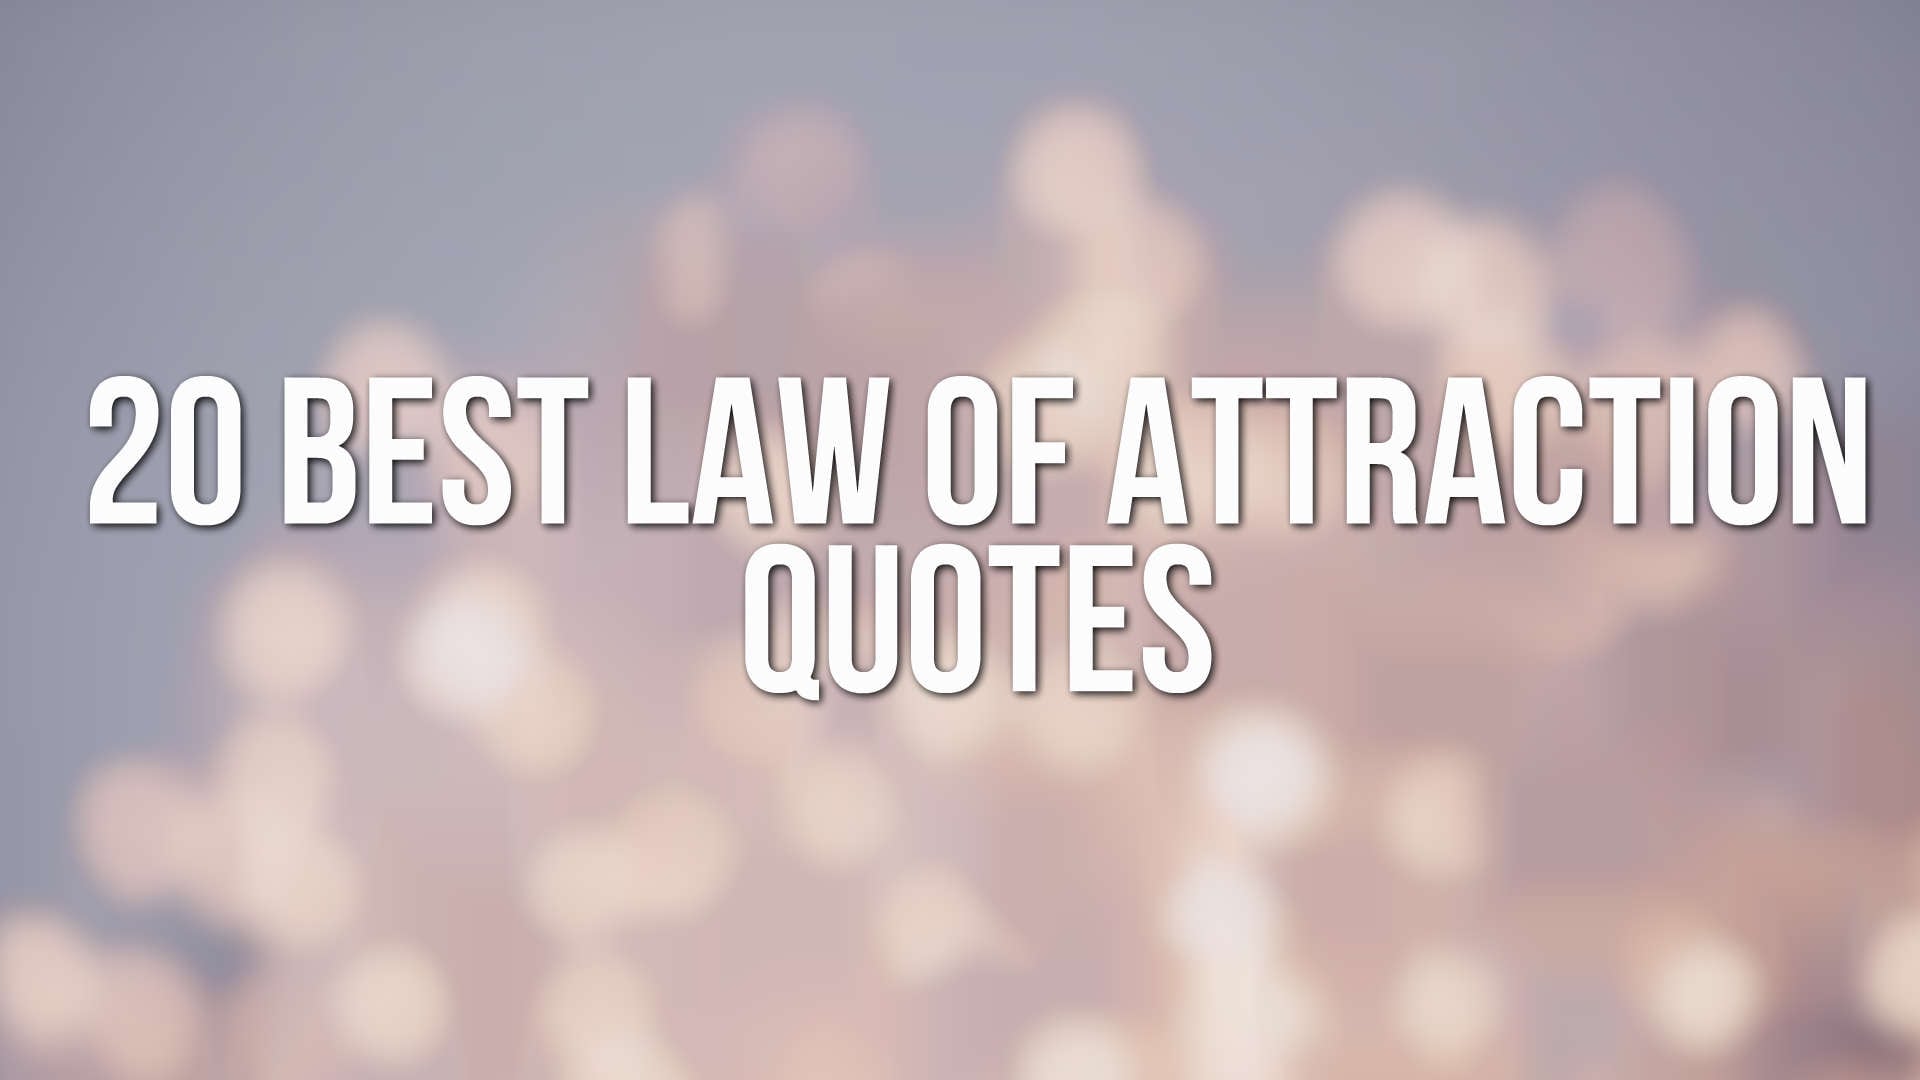 Money Law Of Attraction Quotes Hd - 1920x1080 Wallpaper 